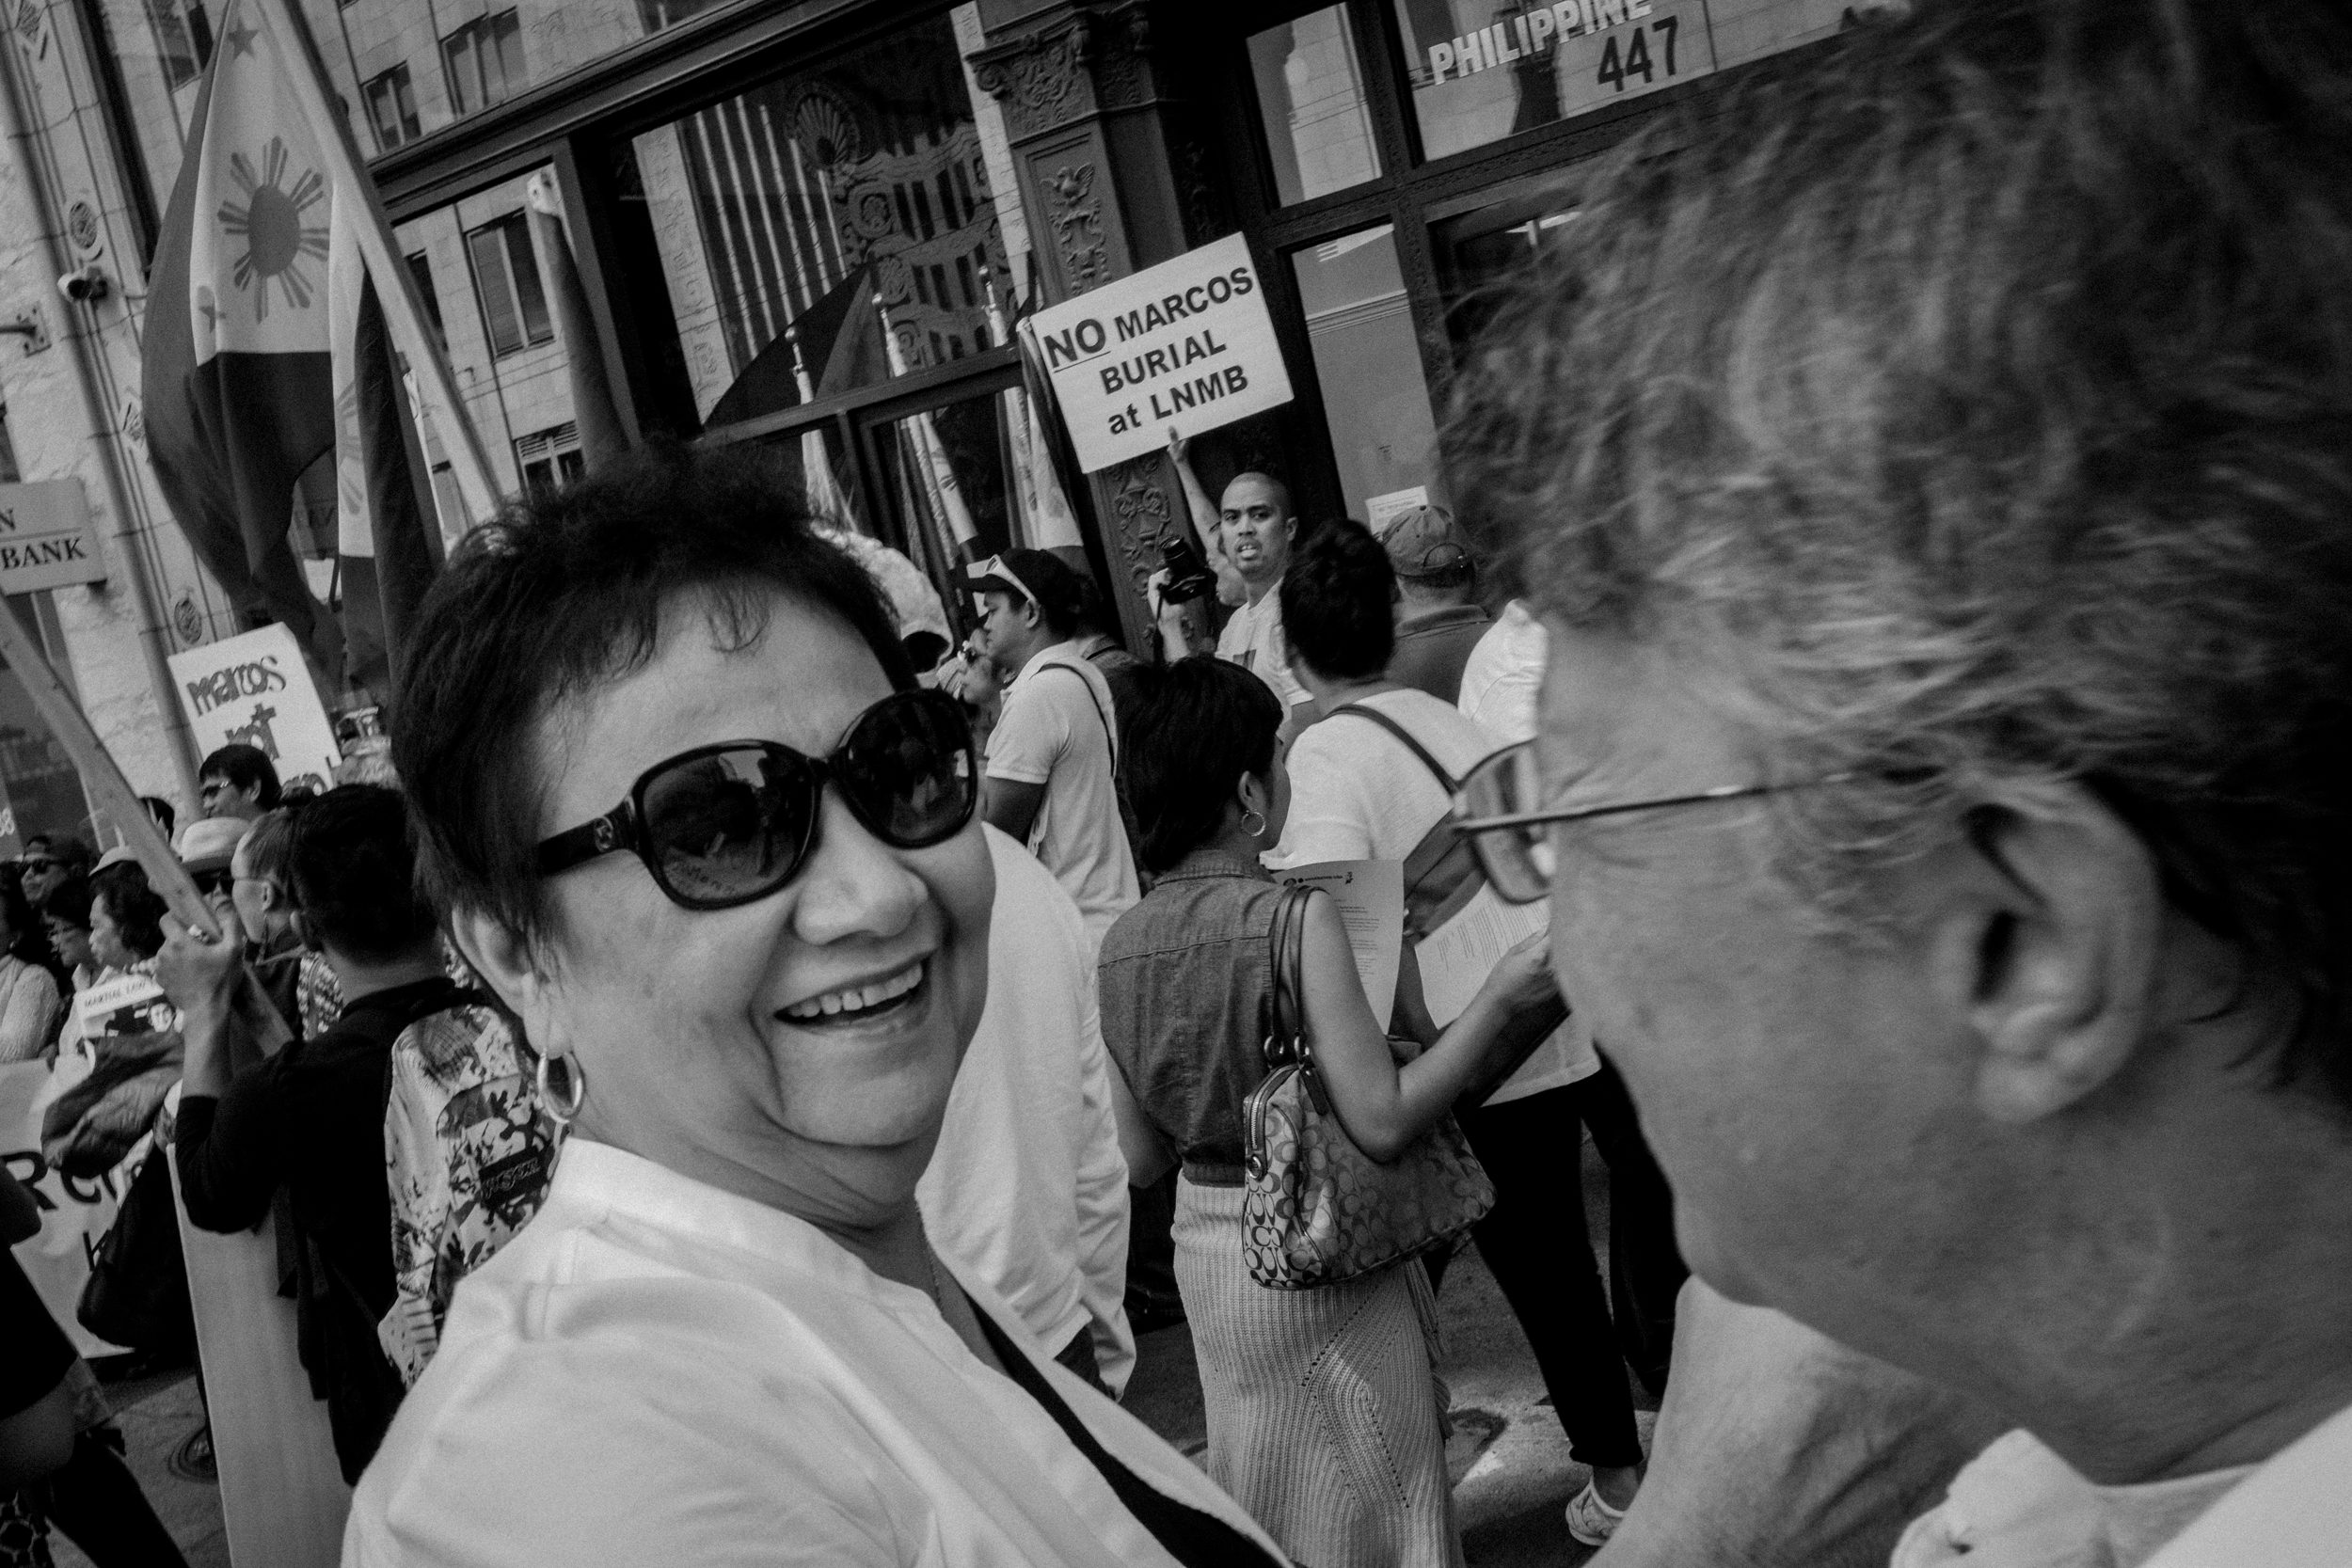 OLD TIMES. Sorcy Apostol of Sacramento excited to see fellow former activist Melinda Paras. Photo by Rick Rocamora 